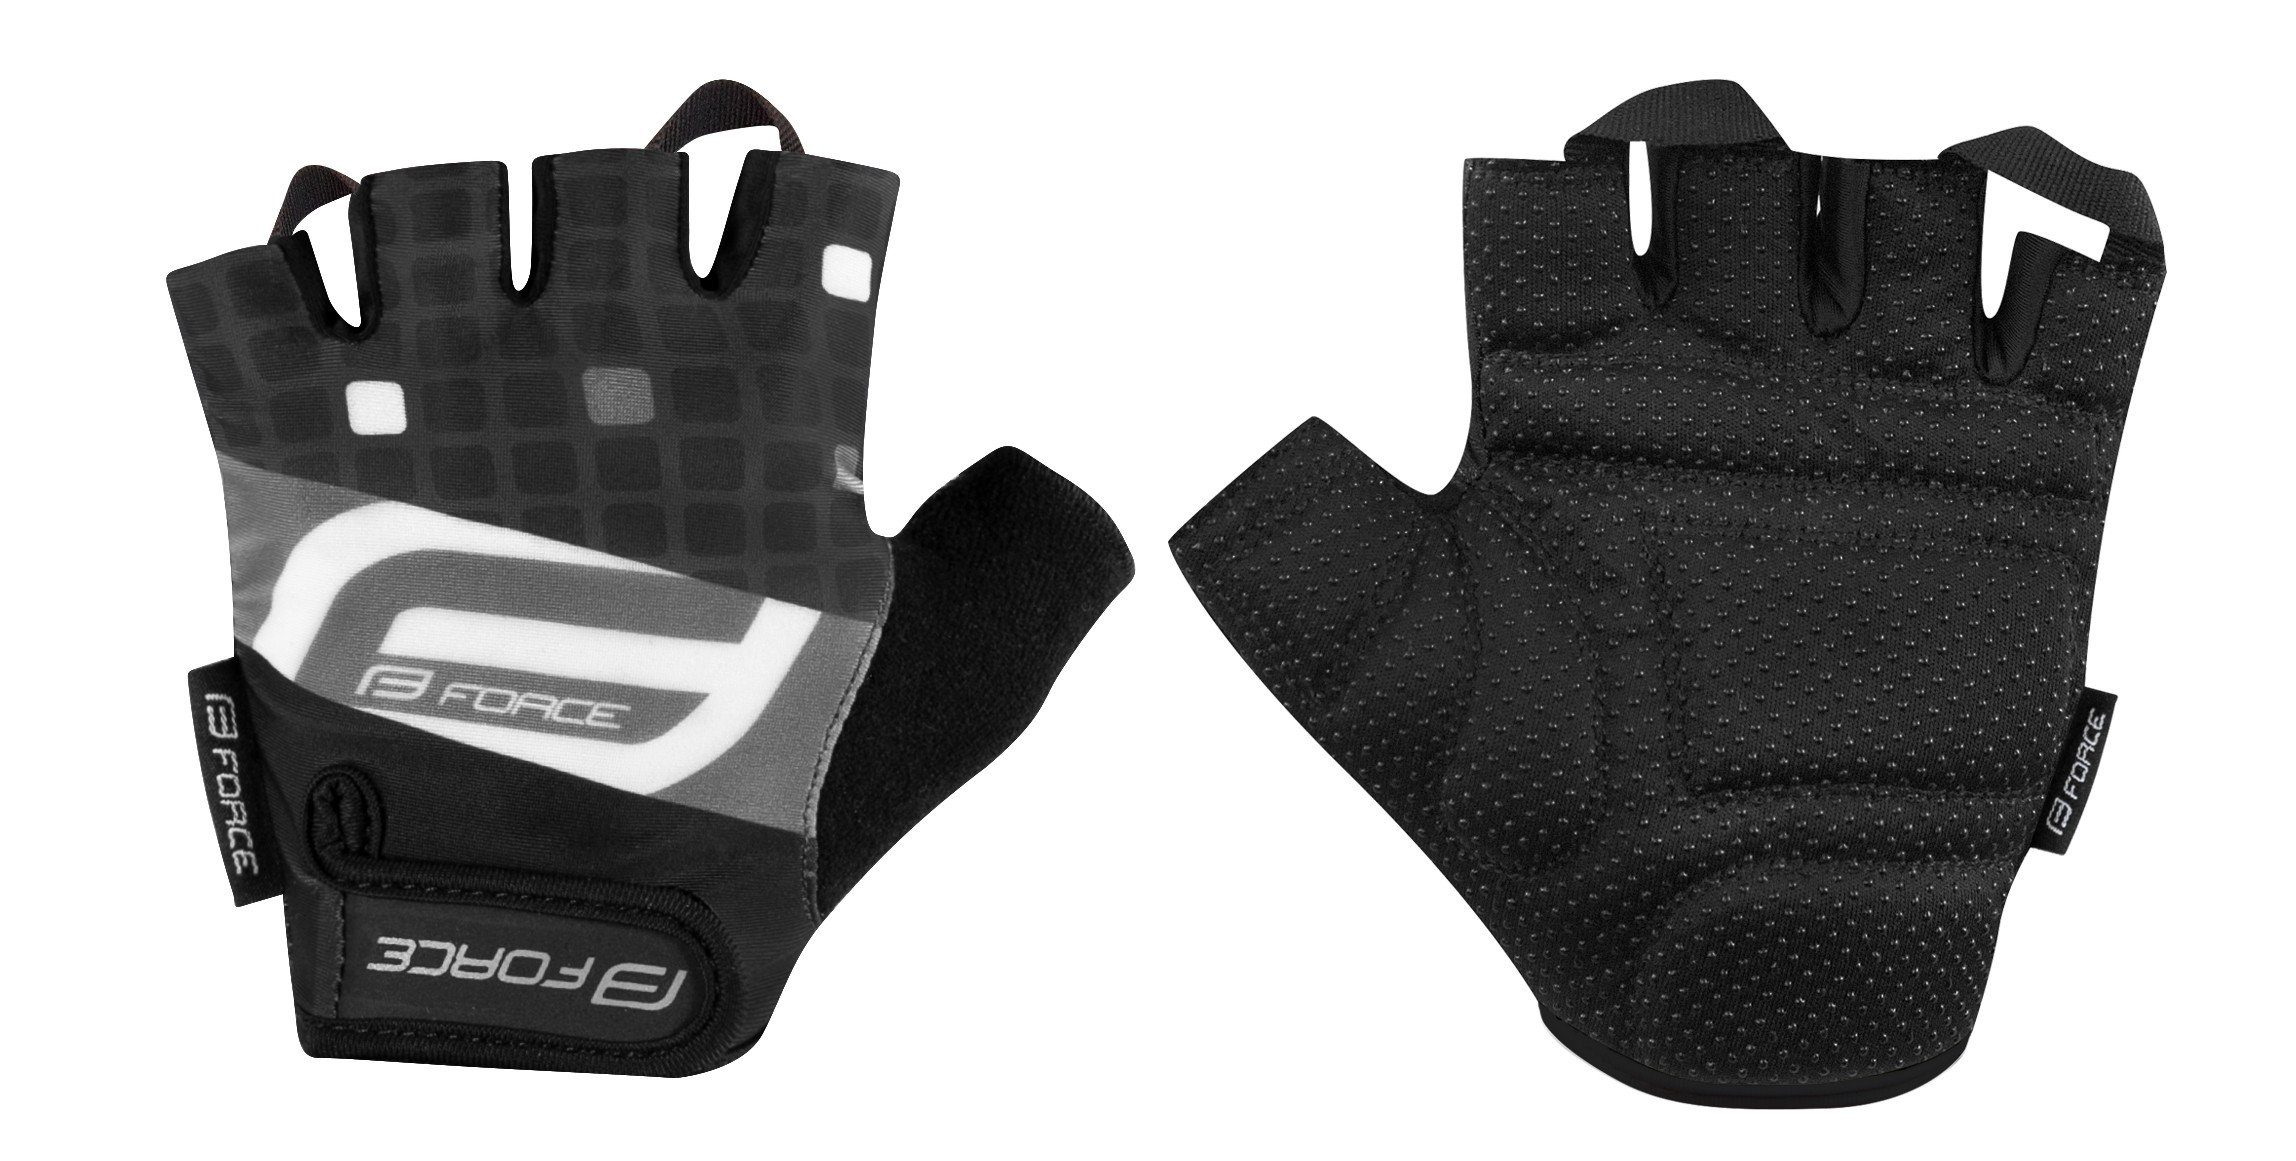 FORCE SQUARE Fahrradhandschuhe FORCE Handschuhe